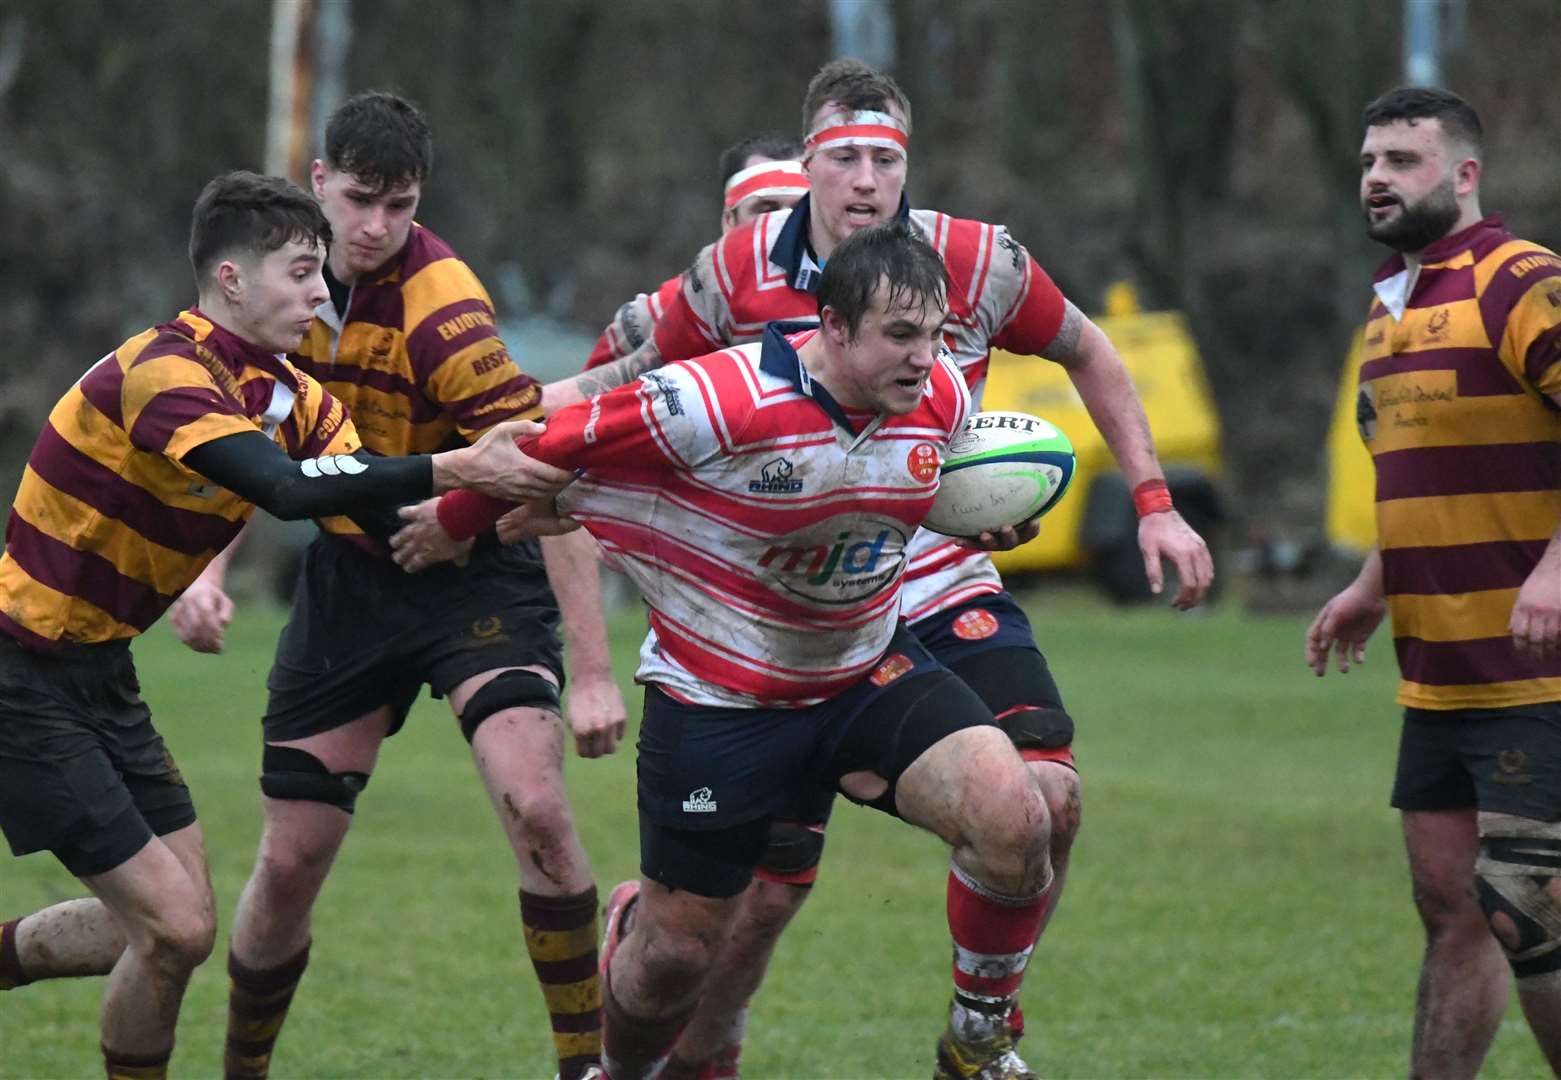 Cameron Hughes tries to break tackle. Picture: James Officer